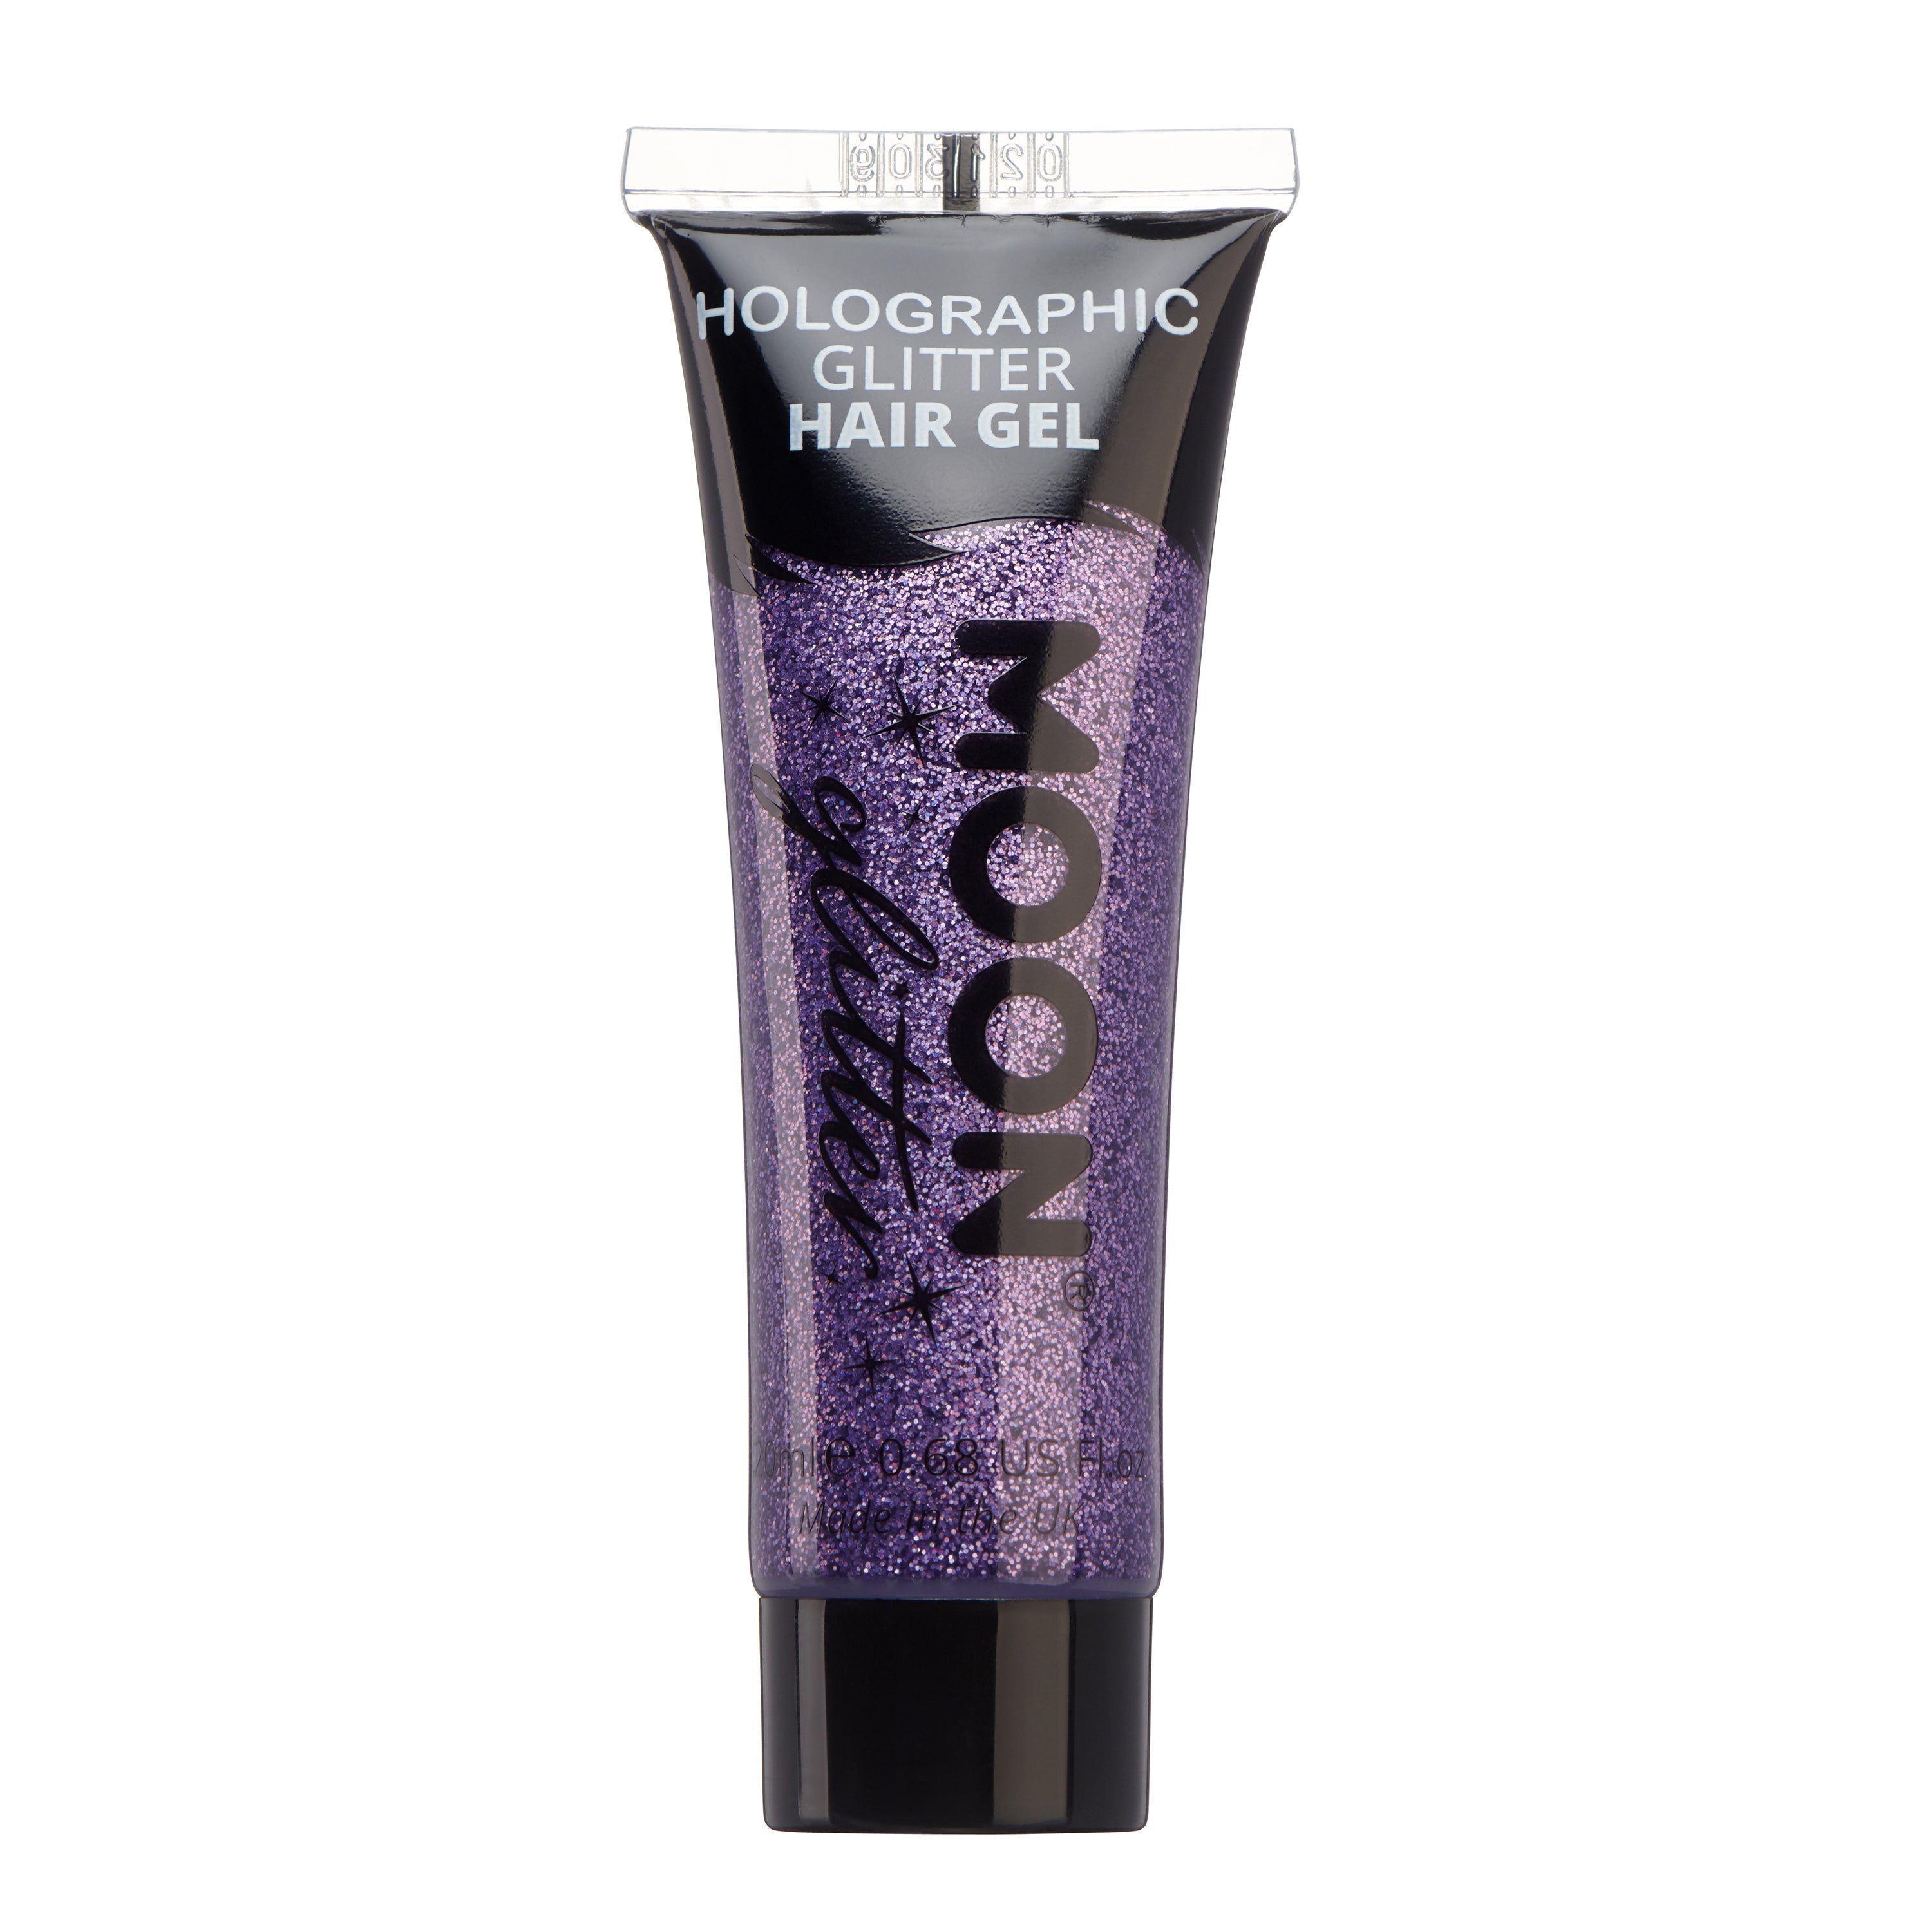 Purple - Holographic Glitter Hair Gel, 20mL. Cosmetically certified, FDA & Health Canada compliant, cruelty free and vegan.